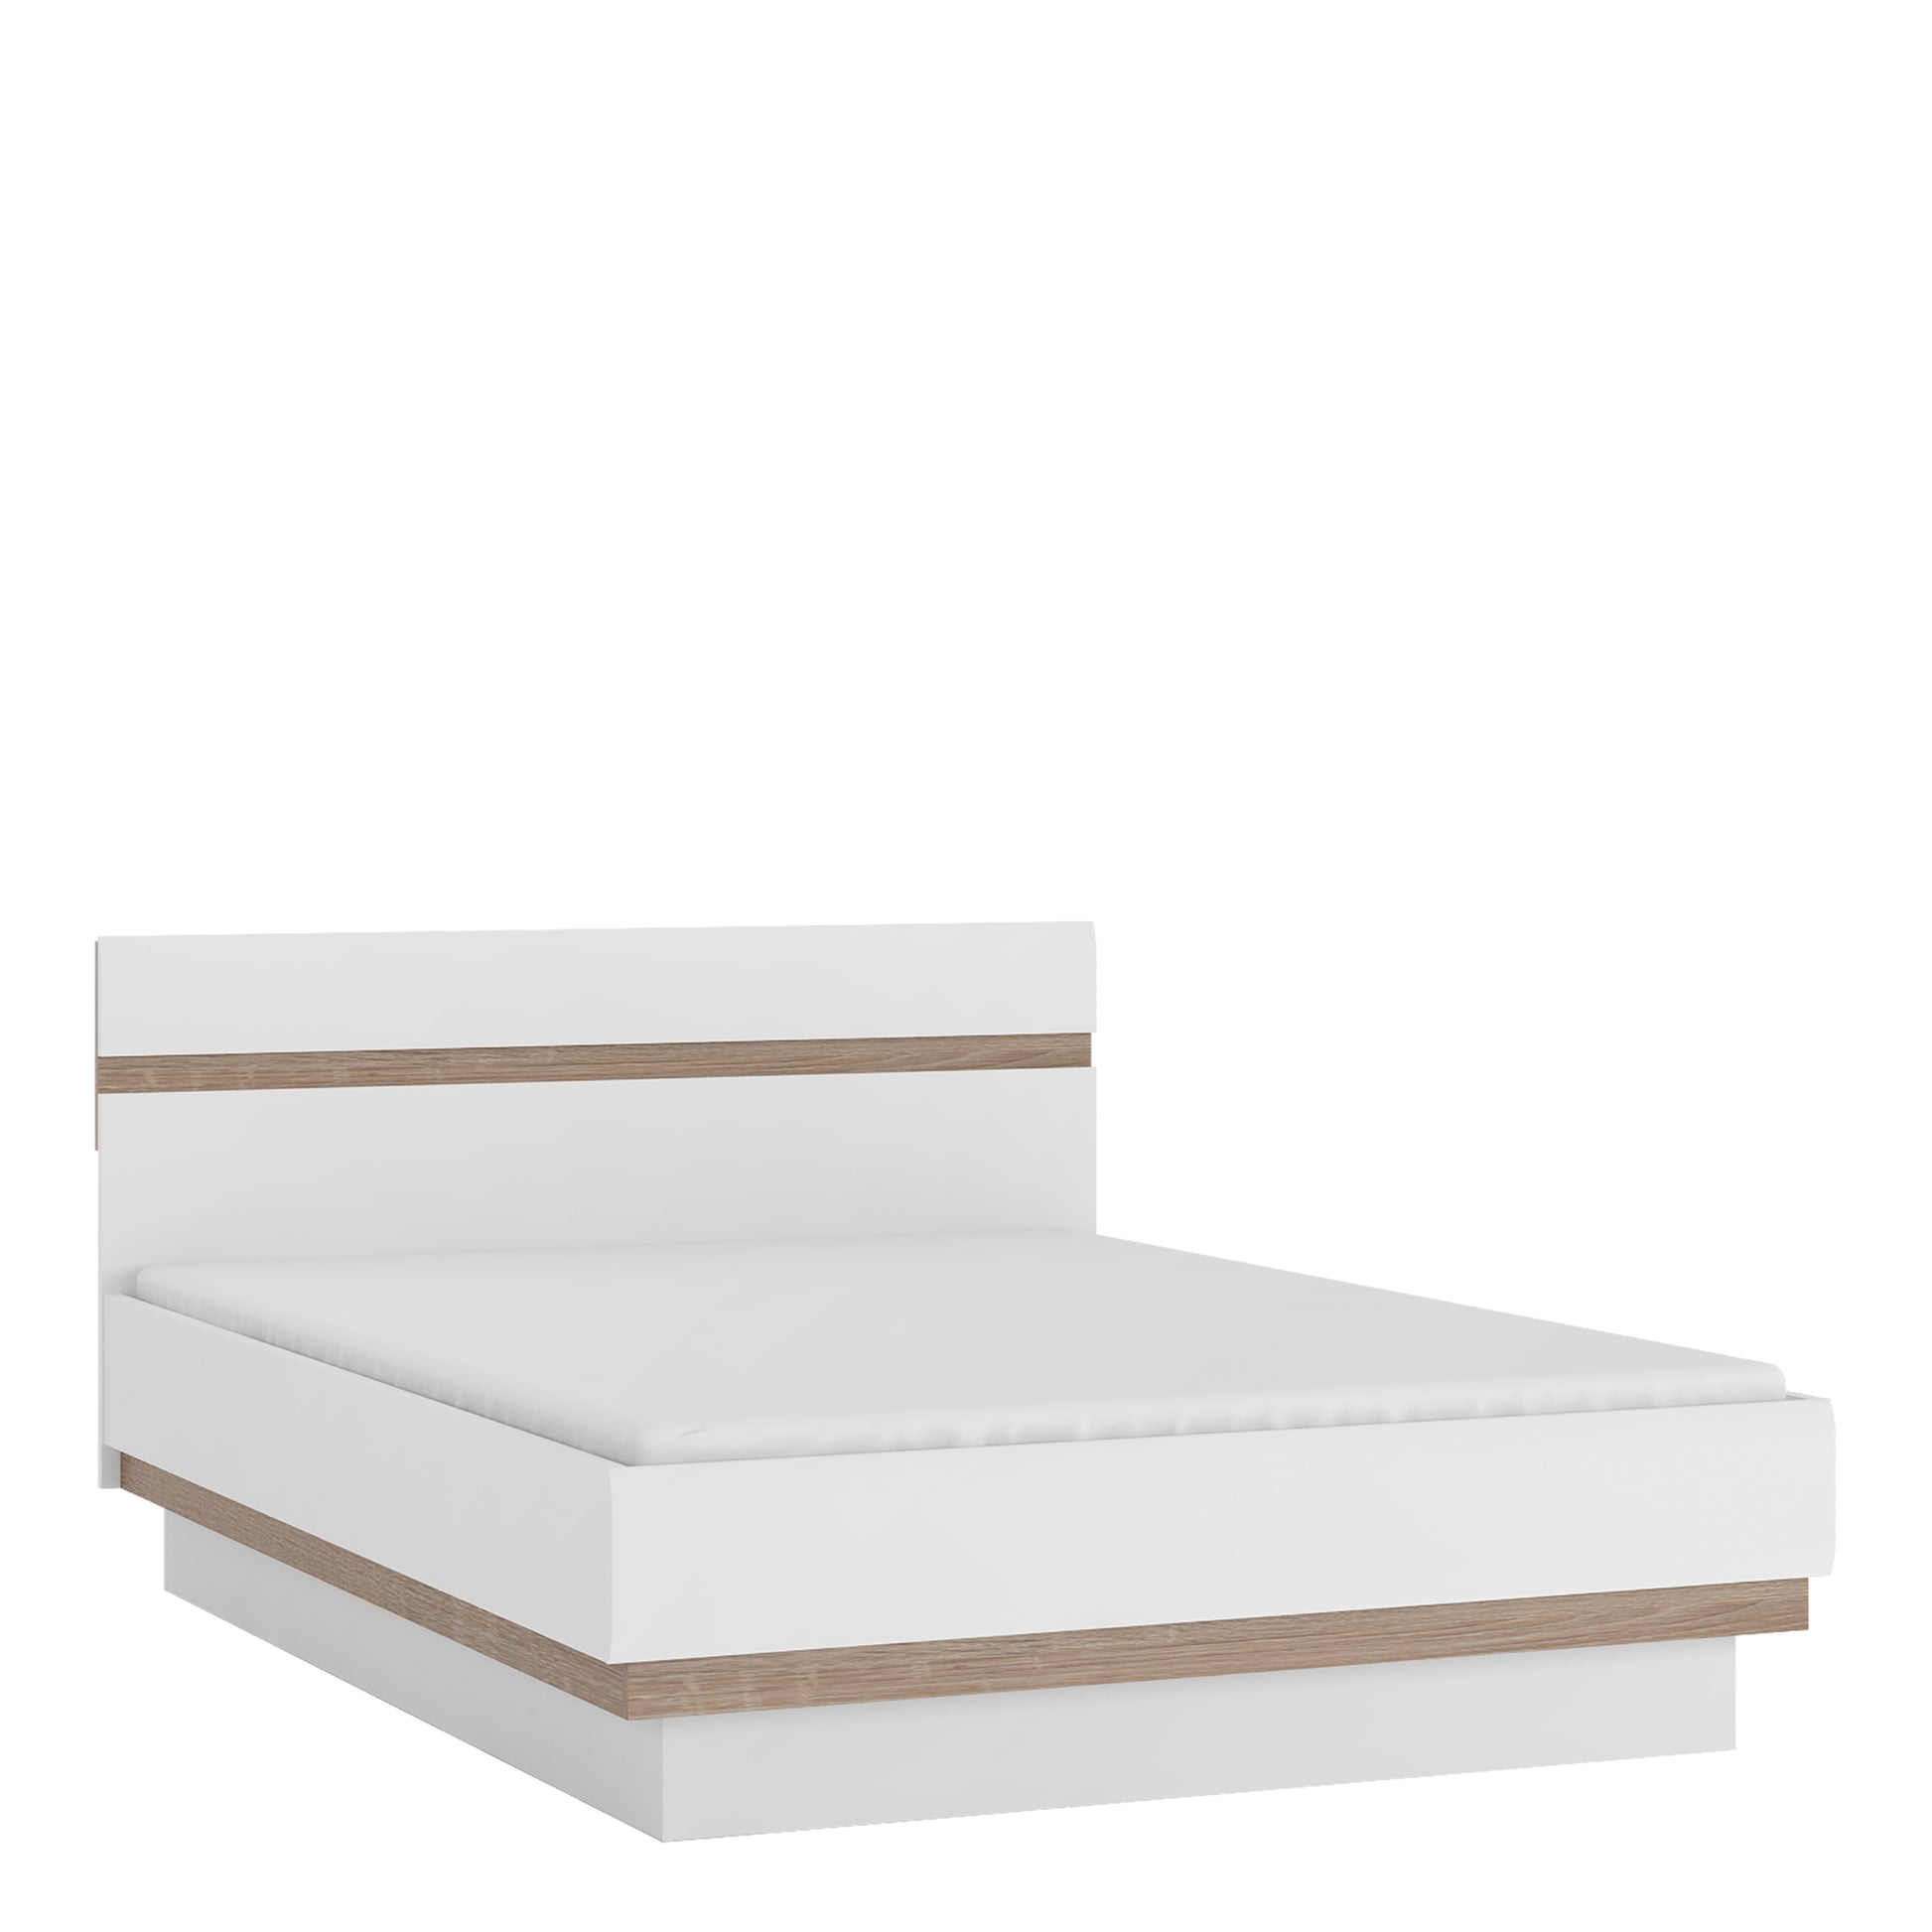 Chelsea  146cm wide Double Bed frame in White with Oak Trim